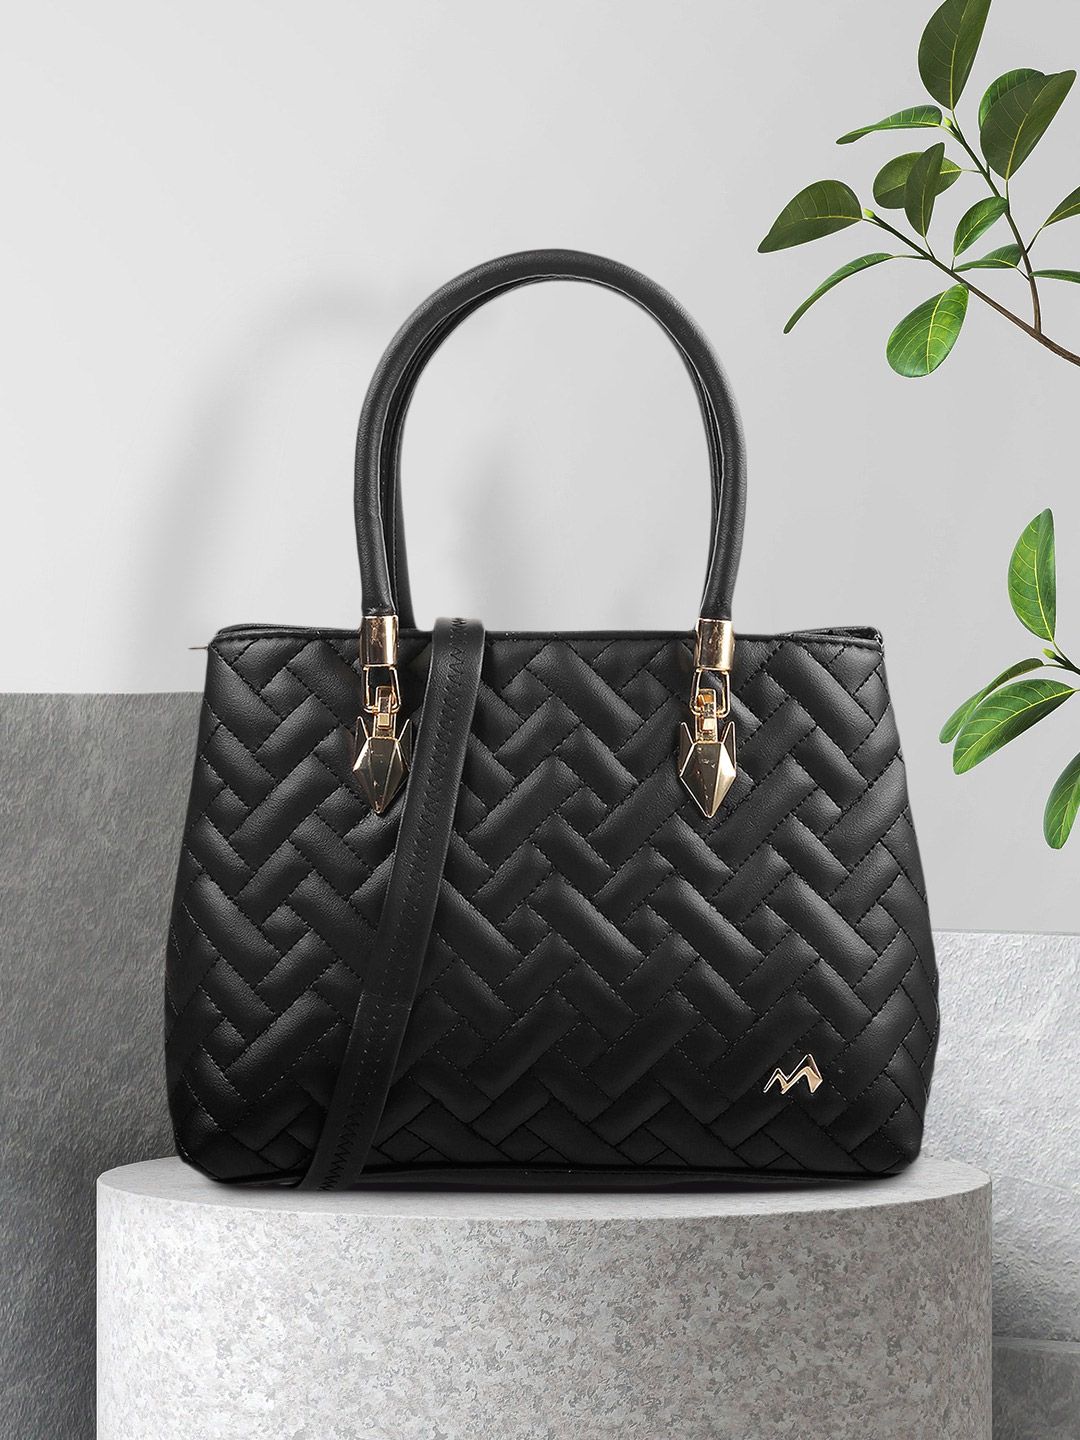 Metro Black Quilted Structured Handheld Bag Price in India